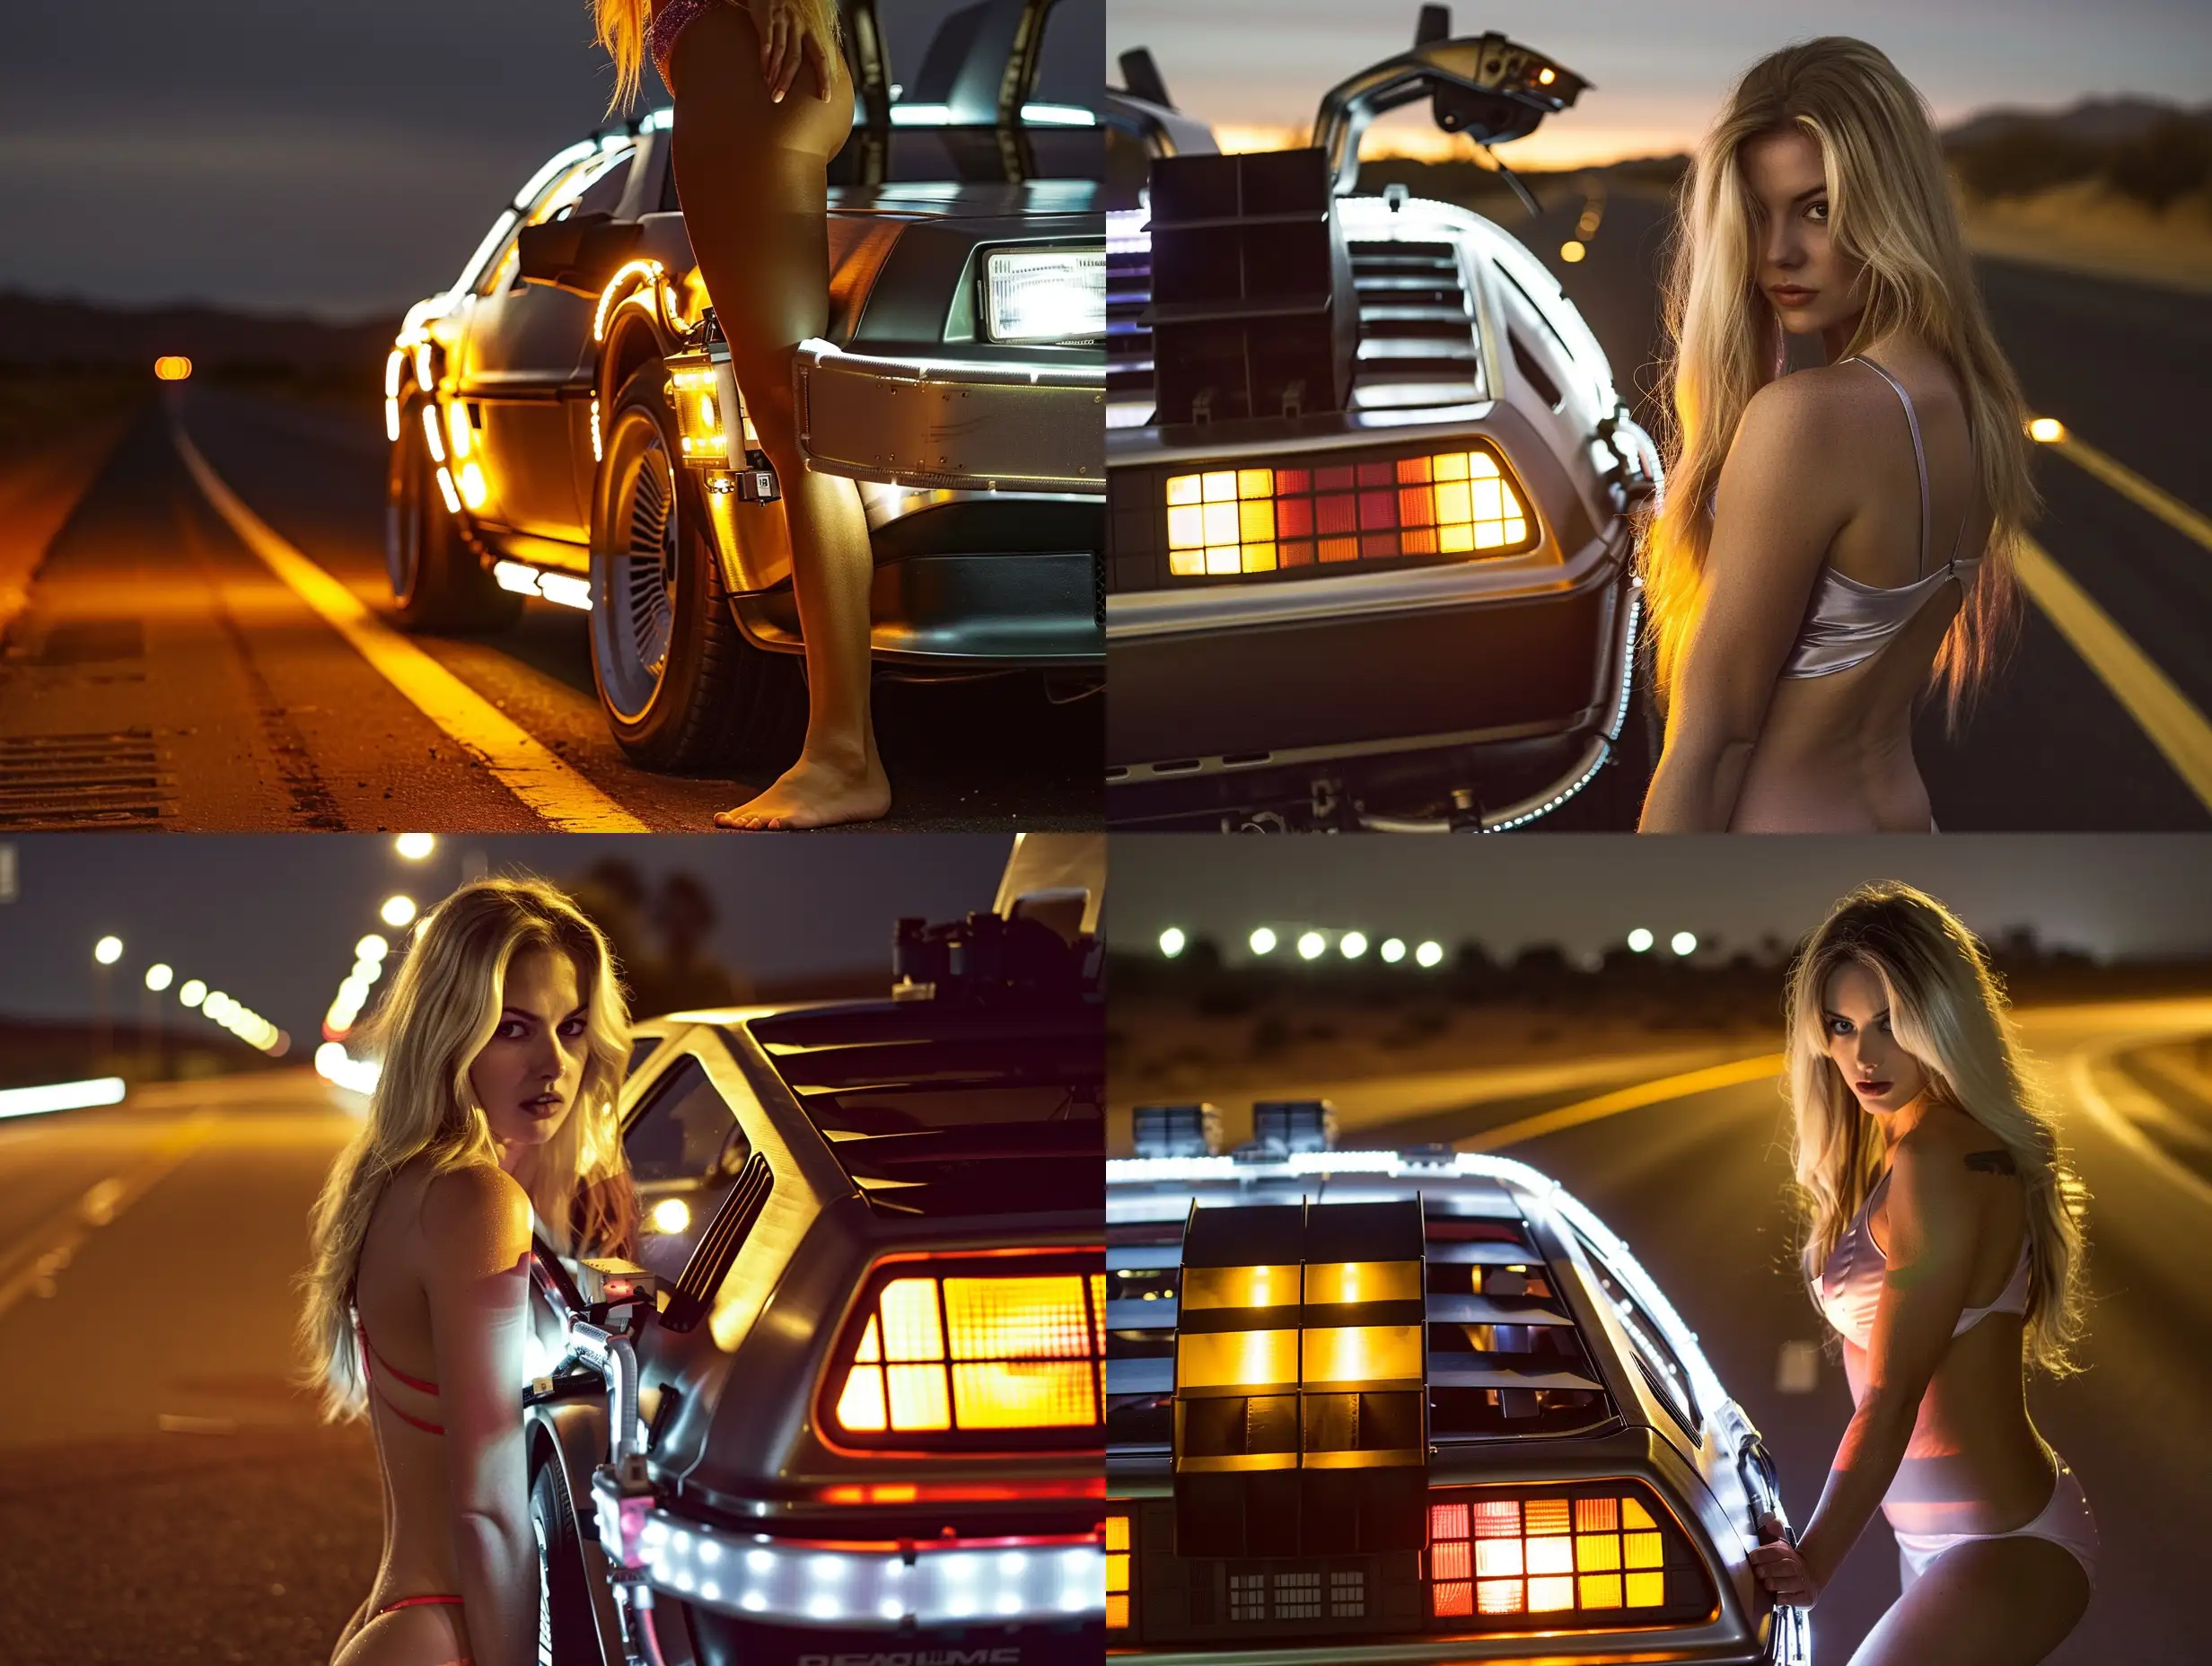 A closeup of a blonde woman, facing camera, face visible, in a swimsuit leaning against the side of a lit up Back to the Future Delorean on a deserted road at night, stunning photography